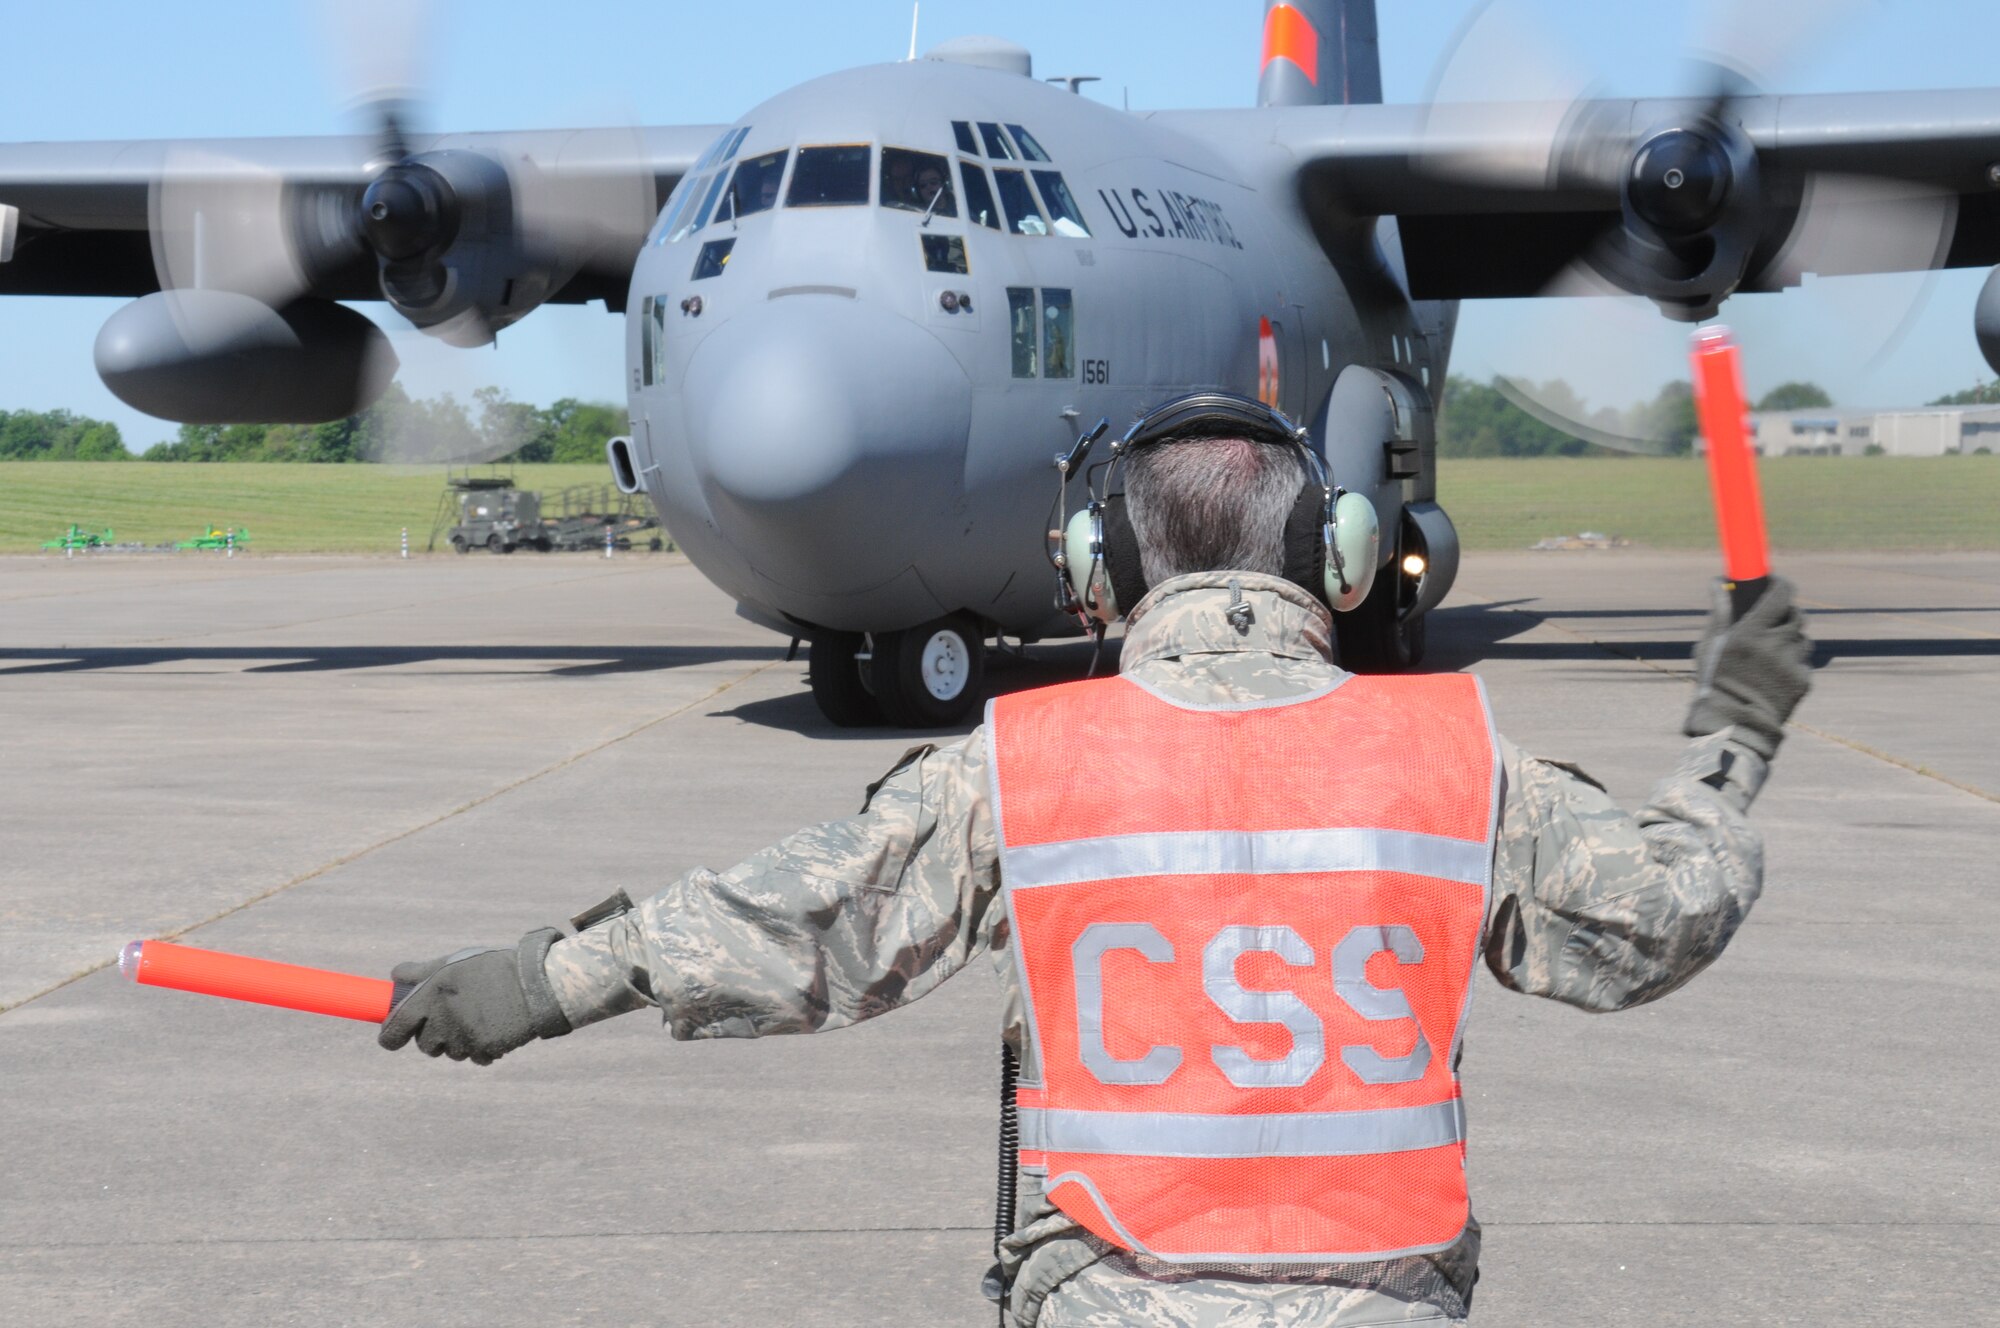 Master Sgt. Shawn Crisco marshals aircraft MAFFS eight out to perform another MAFFS training mission after it is serviced and reloaded in Greenville, SC. Photo by Staff Sgt. Richard Kerner.